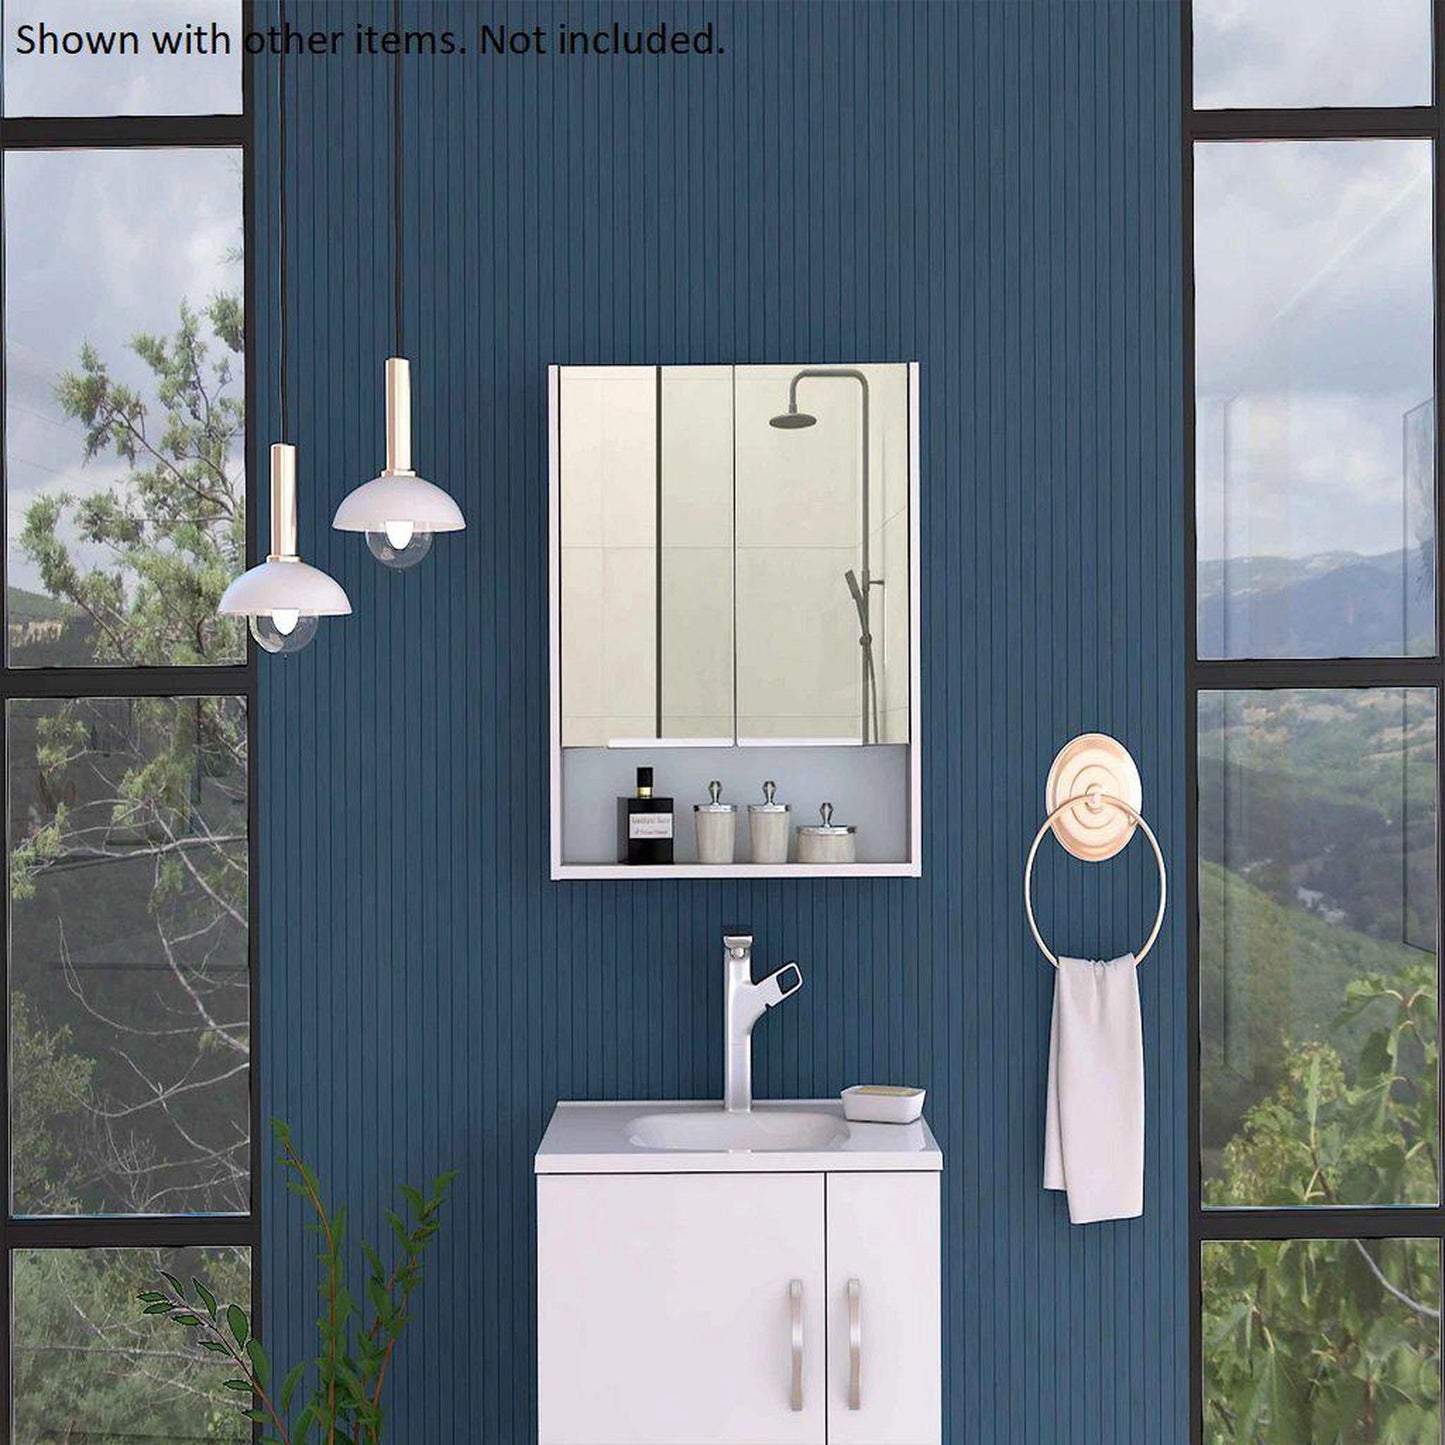 TUHOME Jaspe 24" x 25" White Wall-Mounted Mirror Medicine Cabinet With Wide-Open Shelf